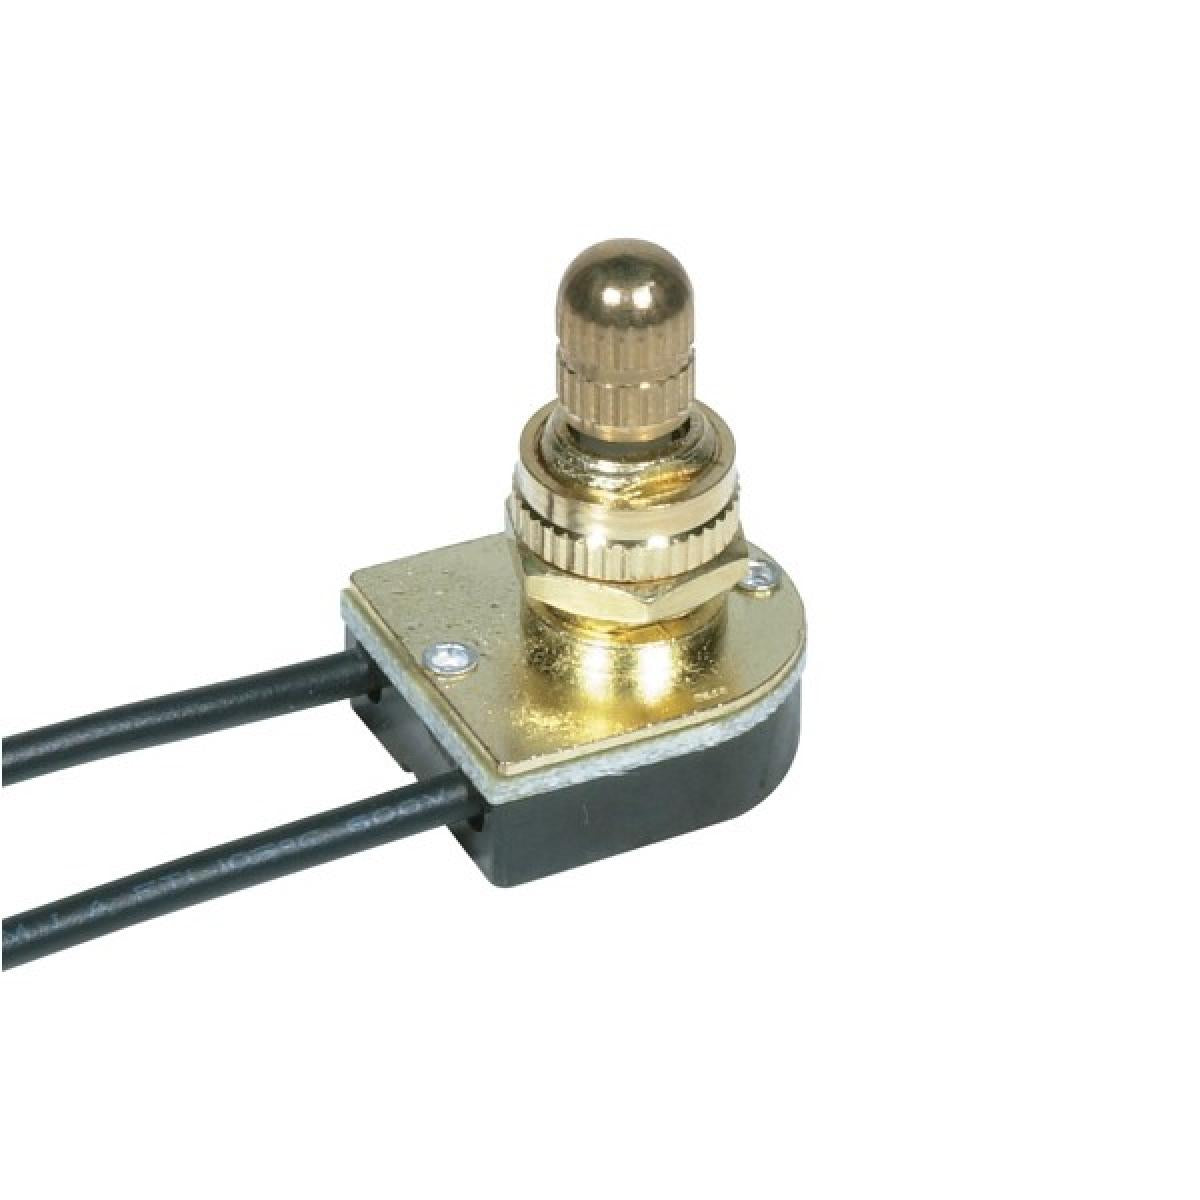 Satco 80-1132 On-Off Metal Rotary Switch 3/8" Metal Bushing Single Circuit 6A-125V, 3A-250V Rating Brass Finish